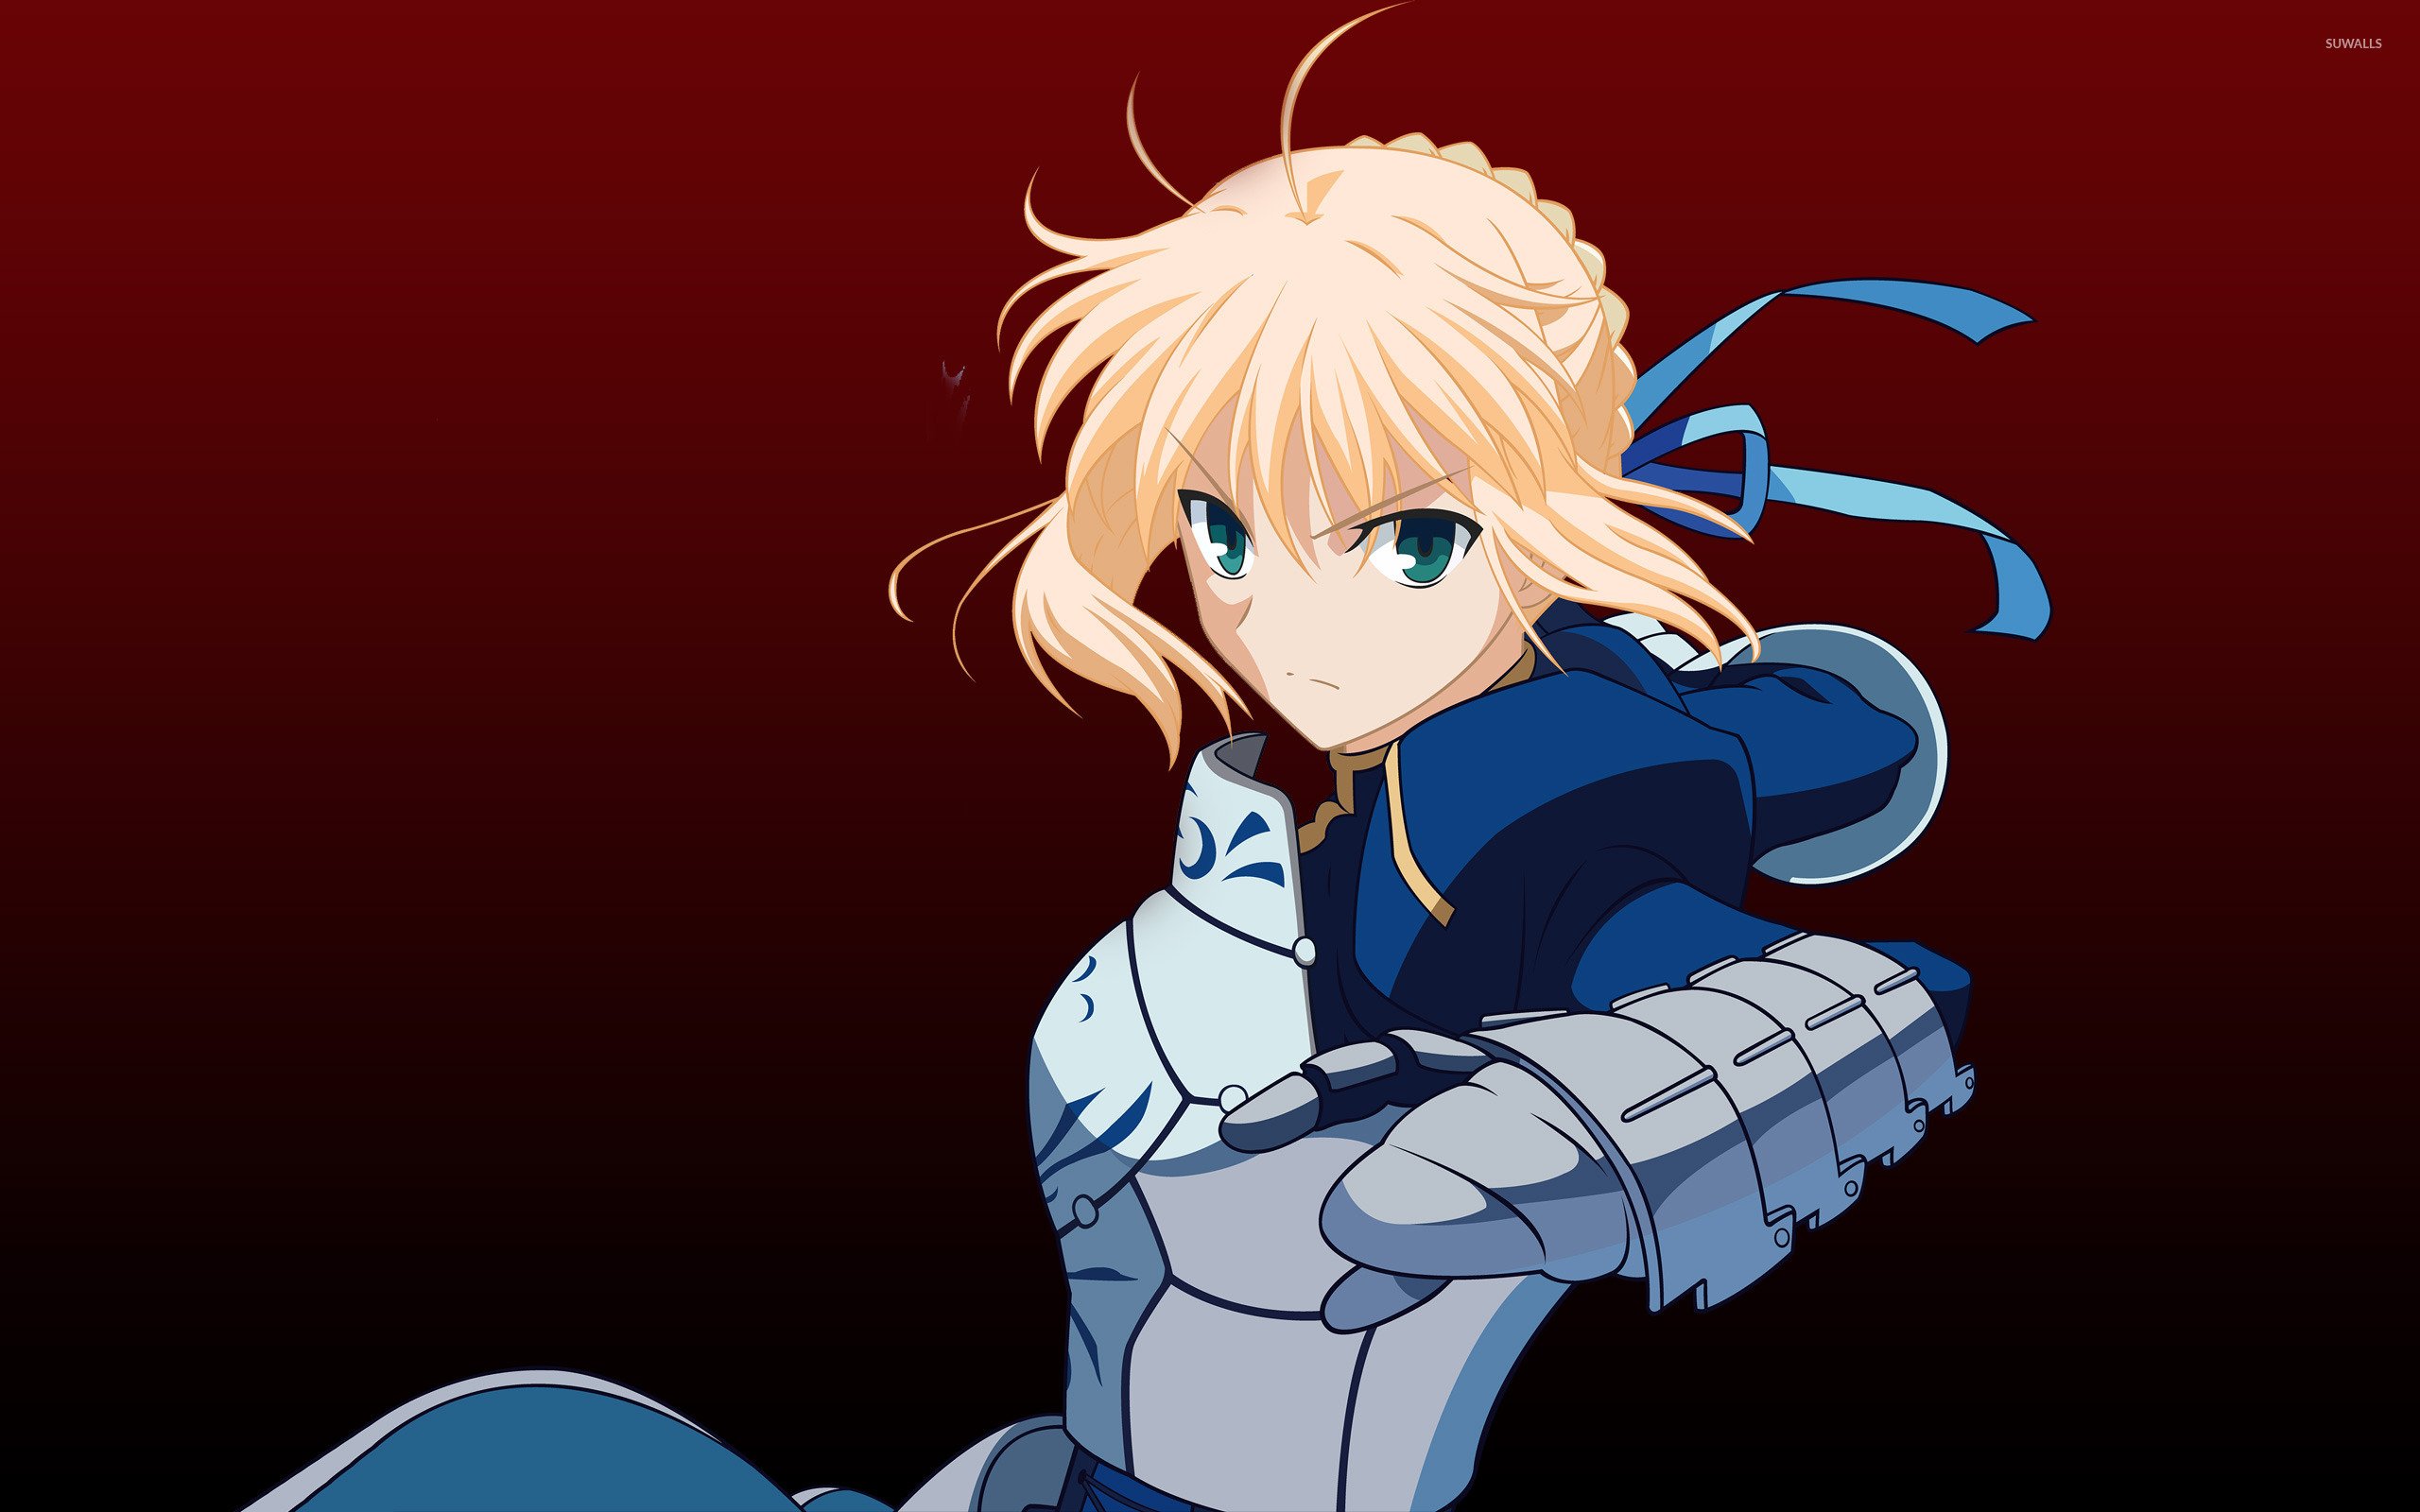 Saber Fatestay night wallpaper Anime wallpapers